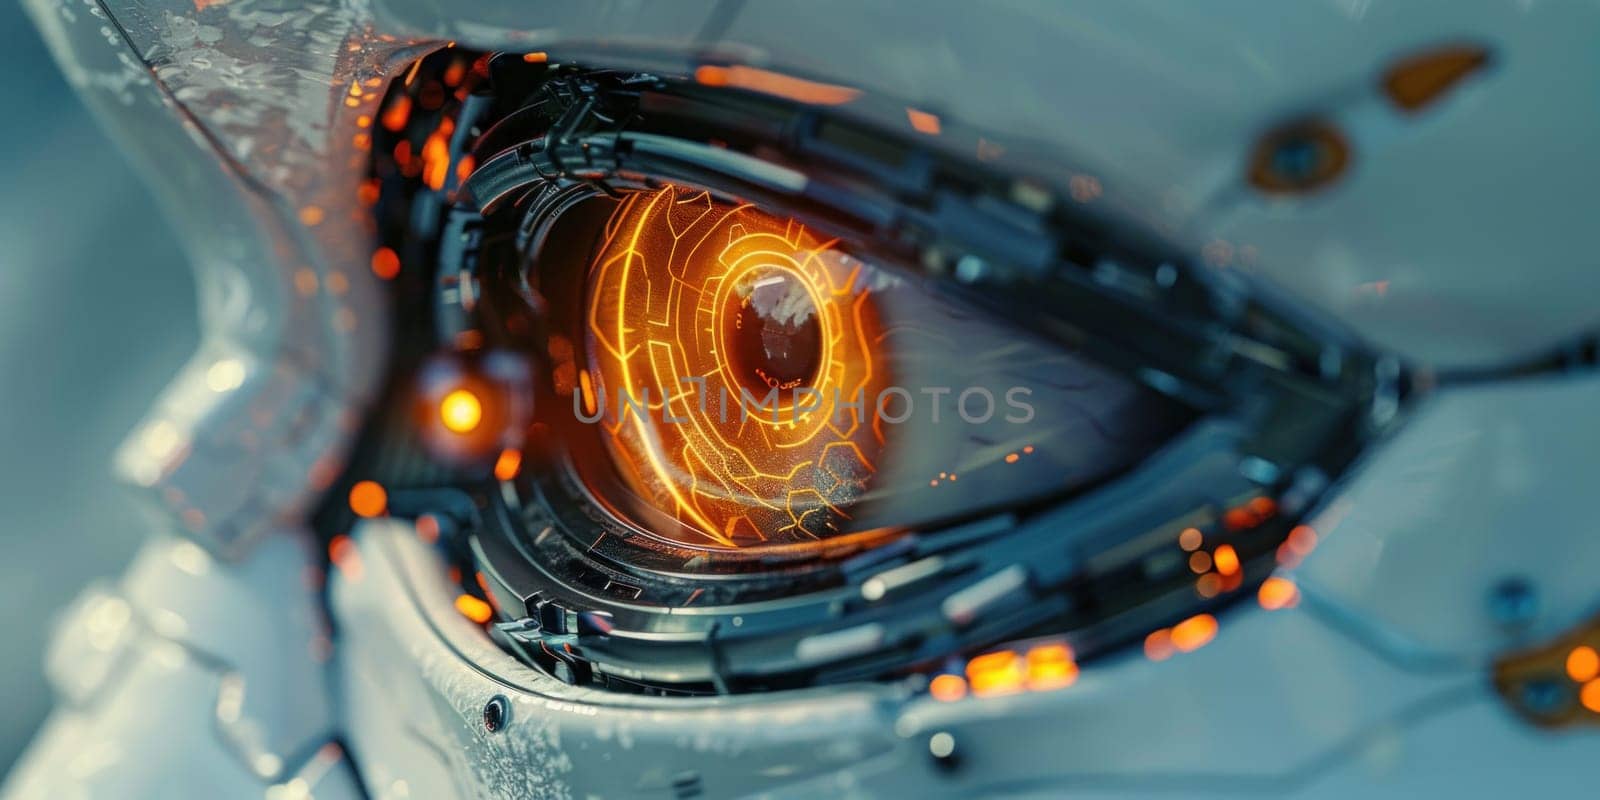 Advanced Futuristic Robot Component Close Up by but_photo